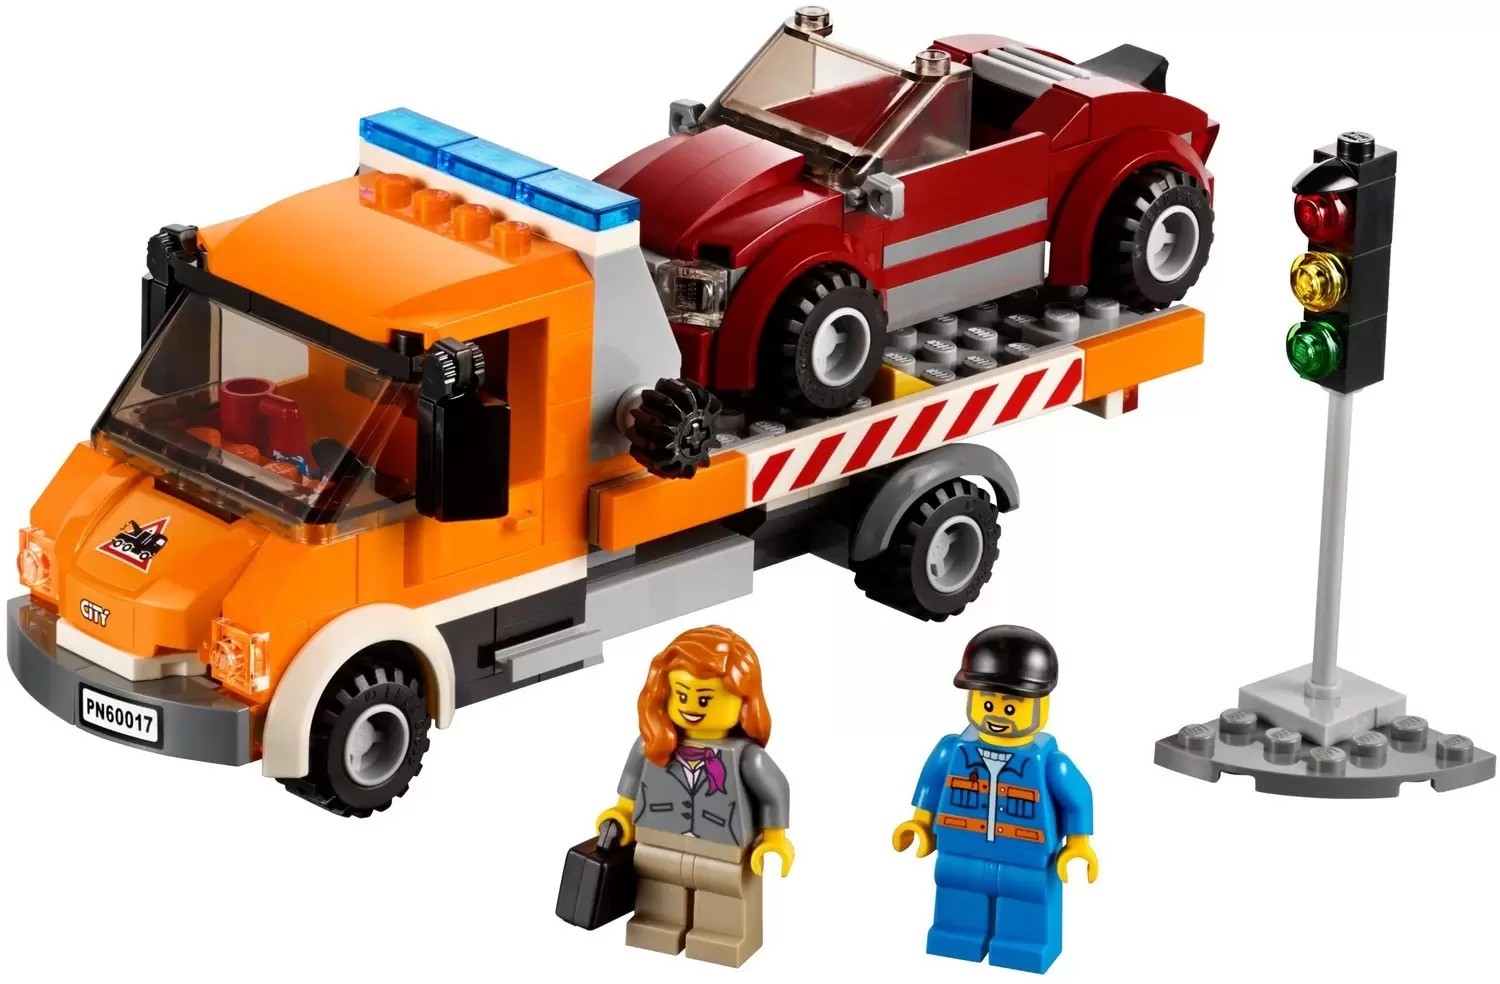 LEGO CITY - Flatbed Truck